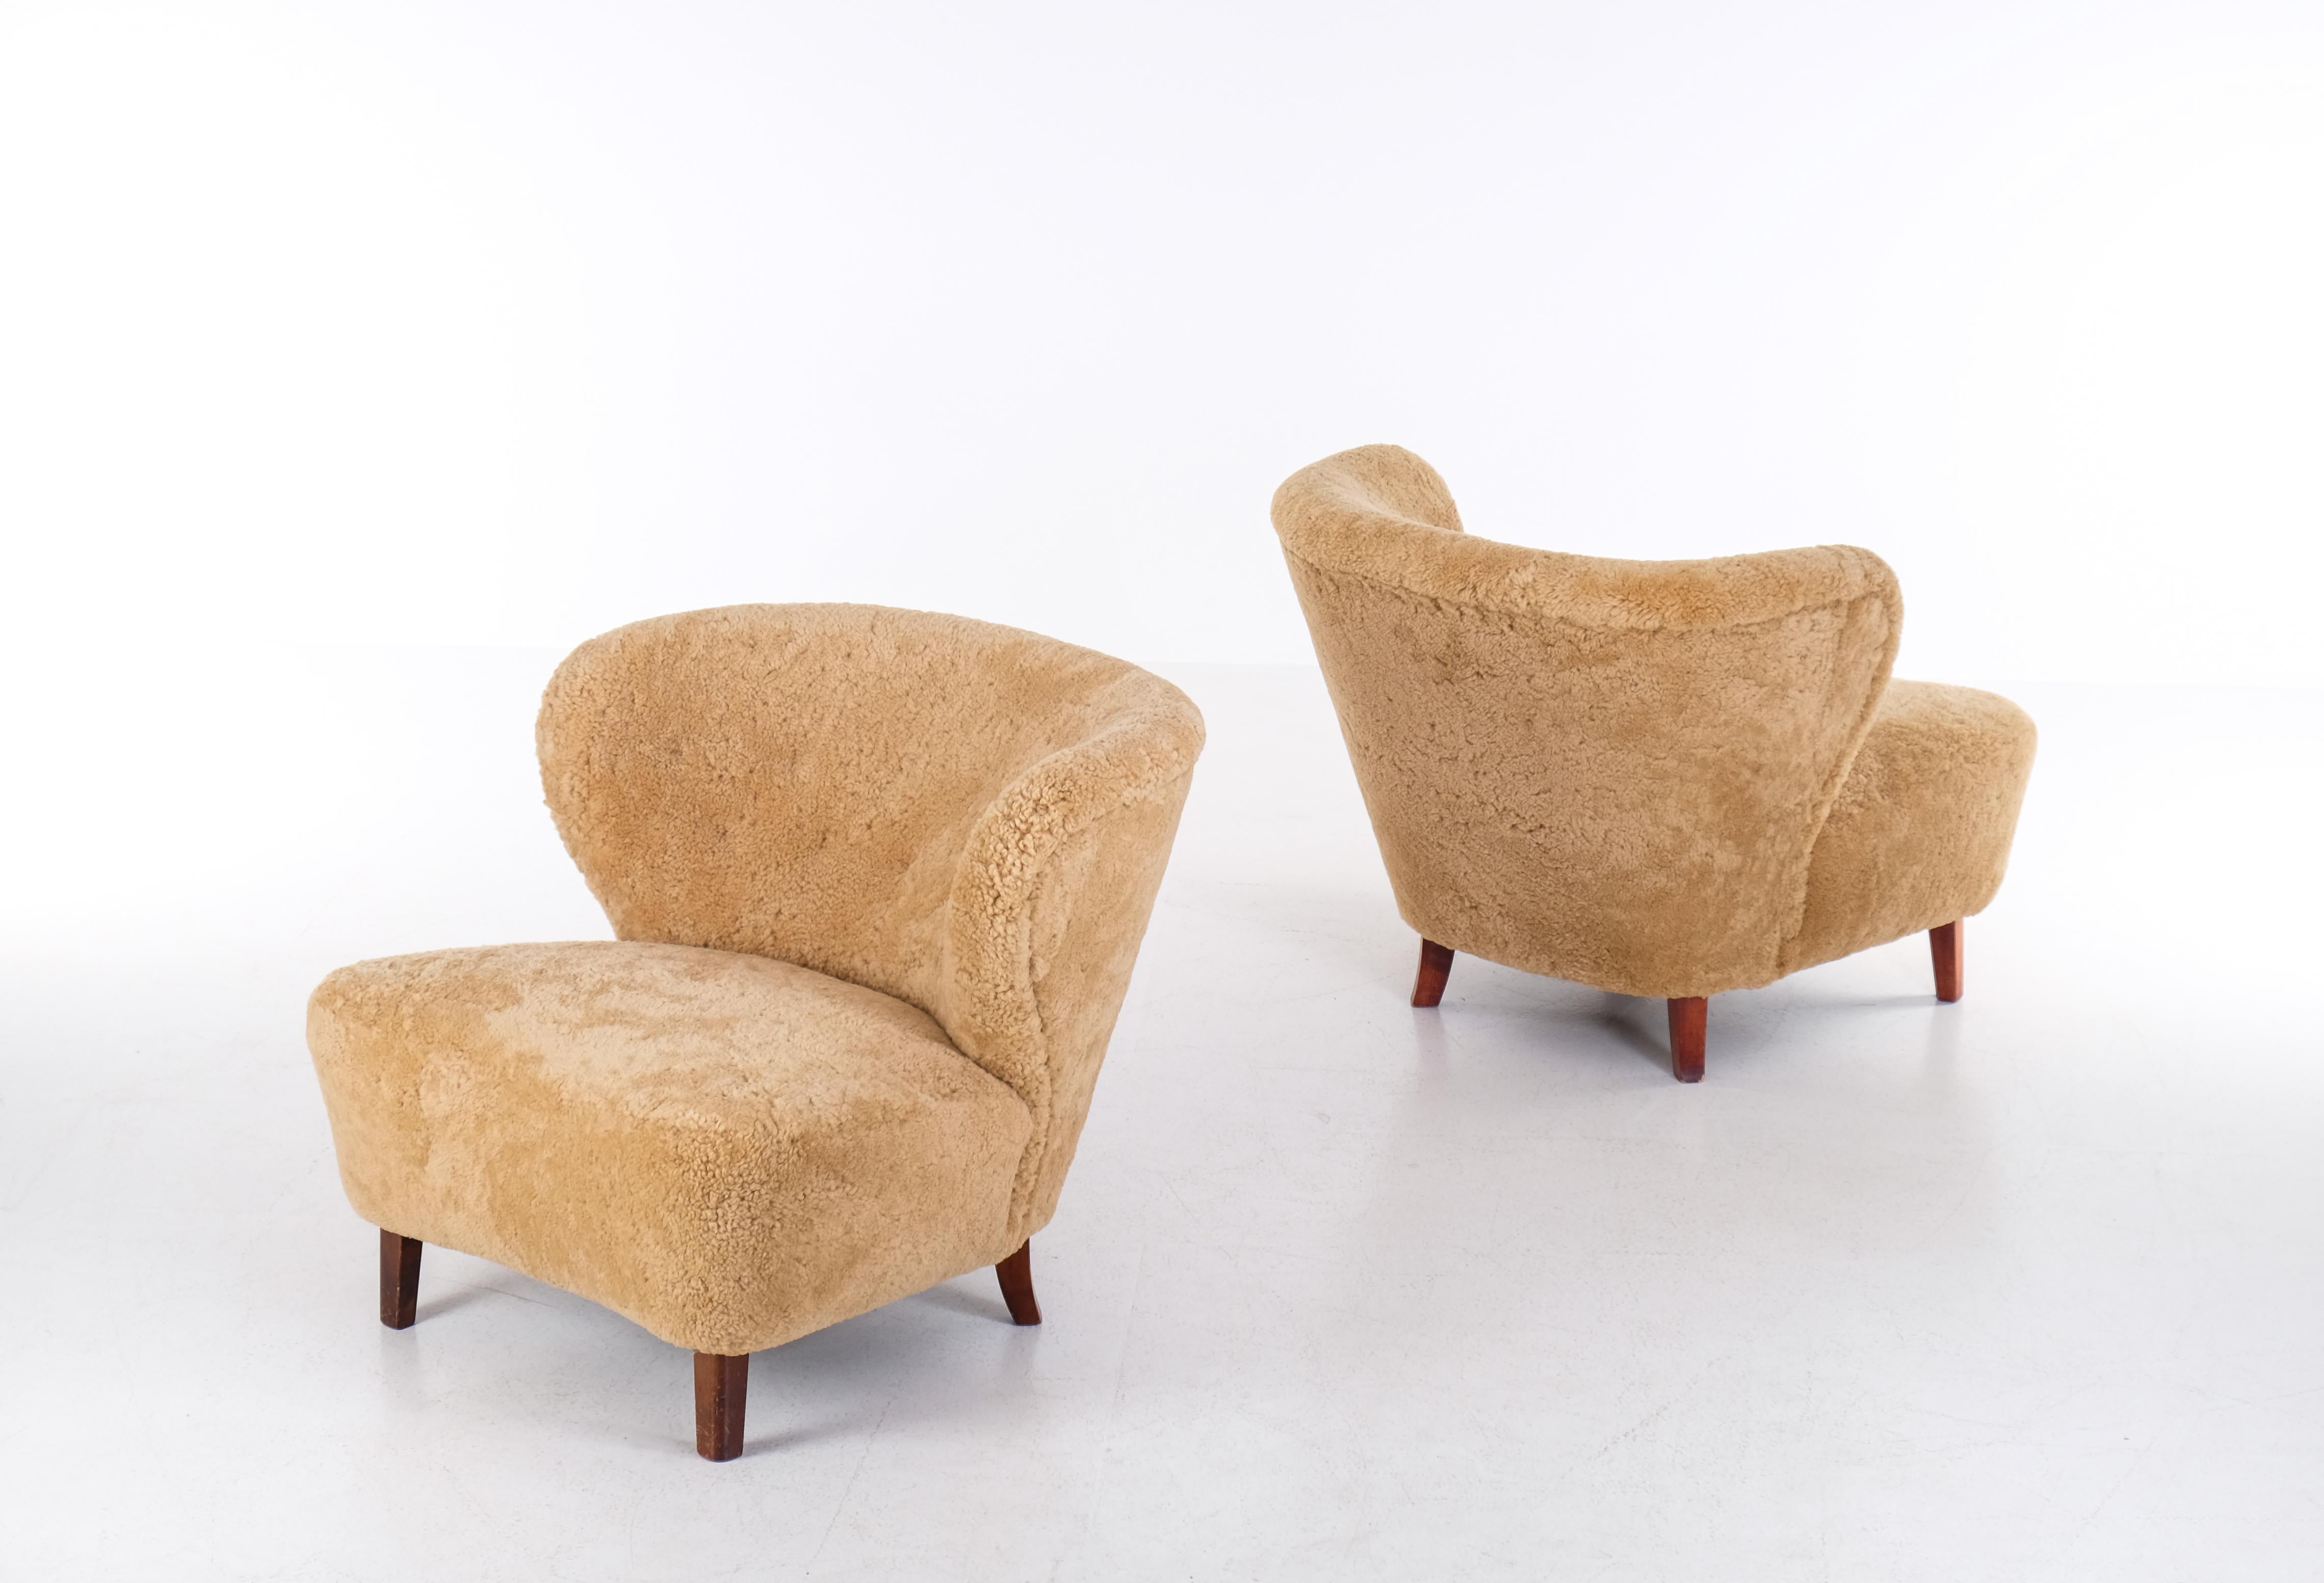 Swedish Pair of Easy Chairs by AB Erik Ek's Snickerifabrik, Malmö, Sweden, 1940s For Sale